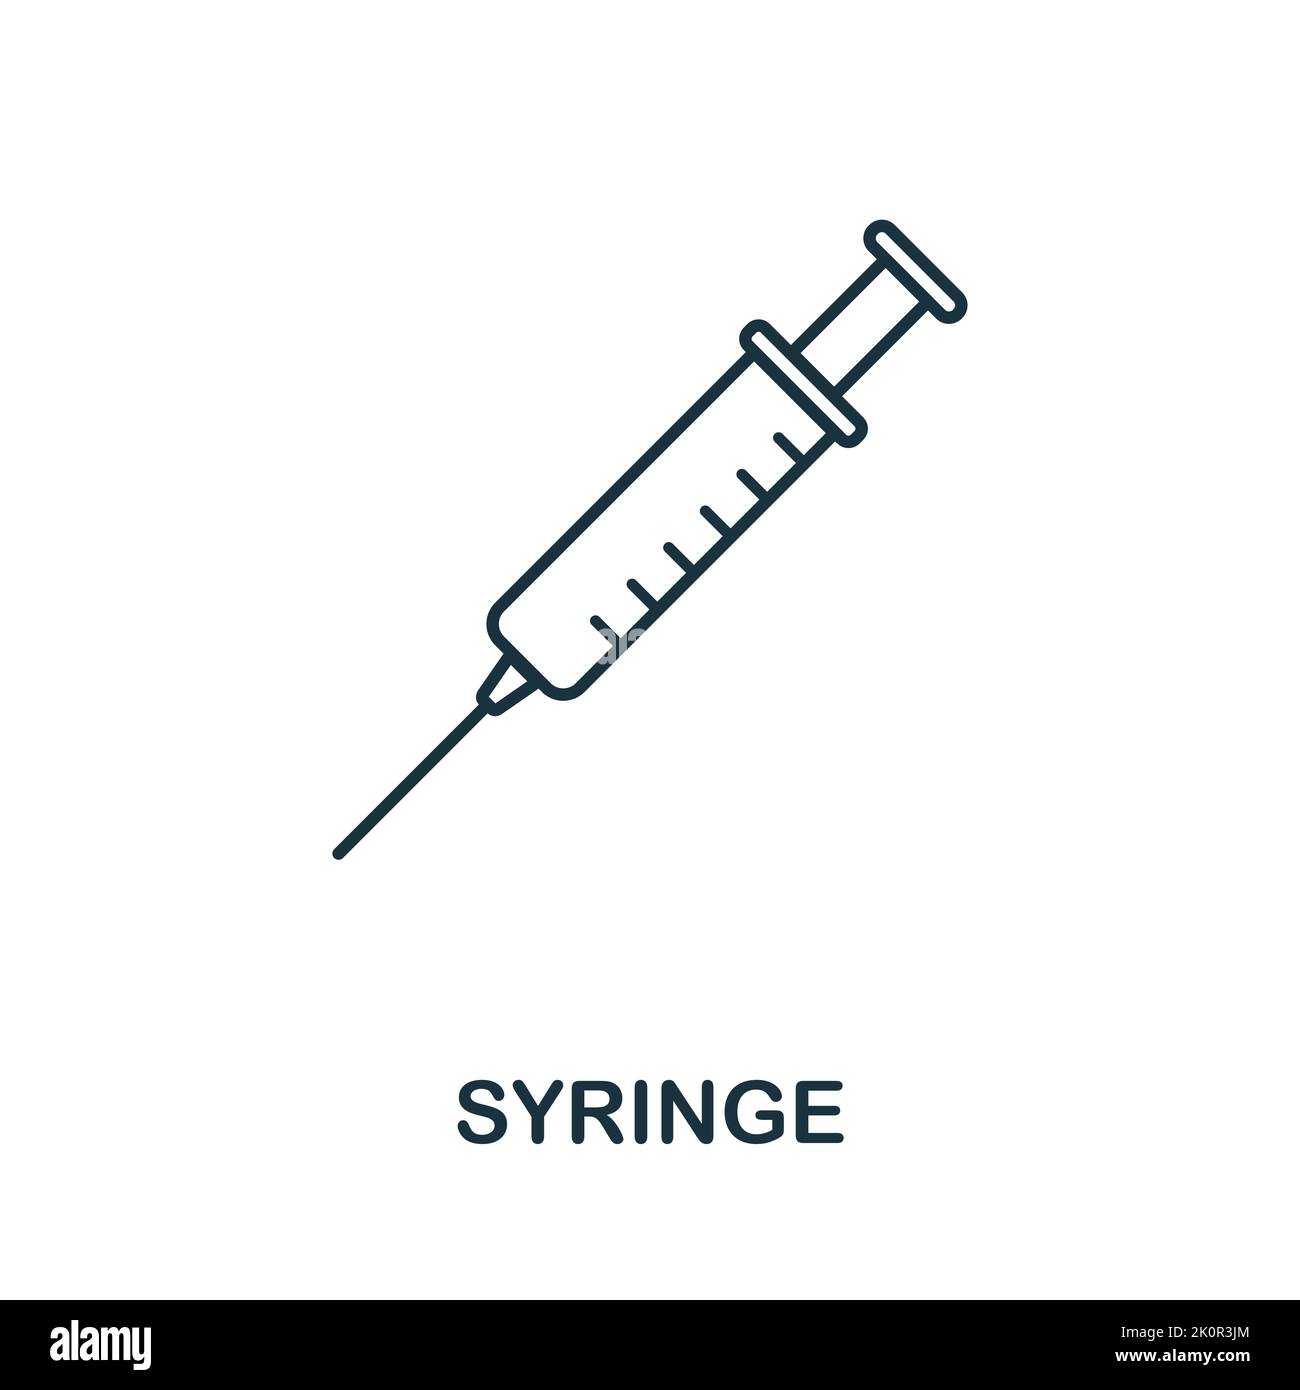 Syringe icon. Monocrome element from medical services collection. Syringe icon for banners, infographics and templates. Stock Vector